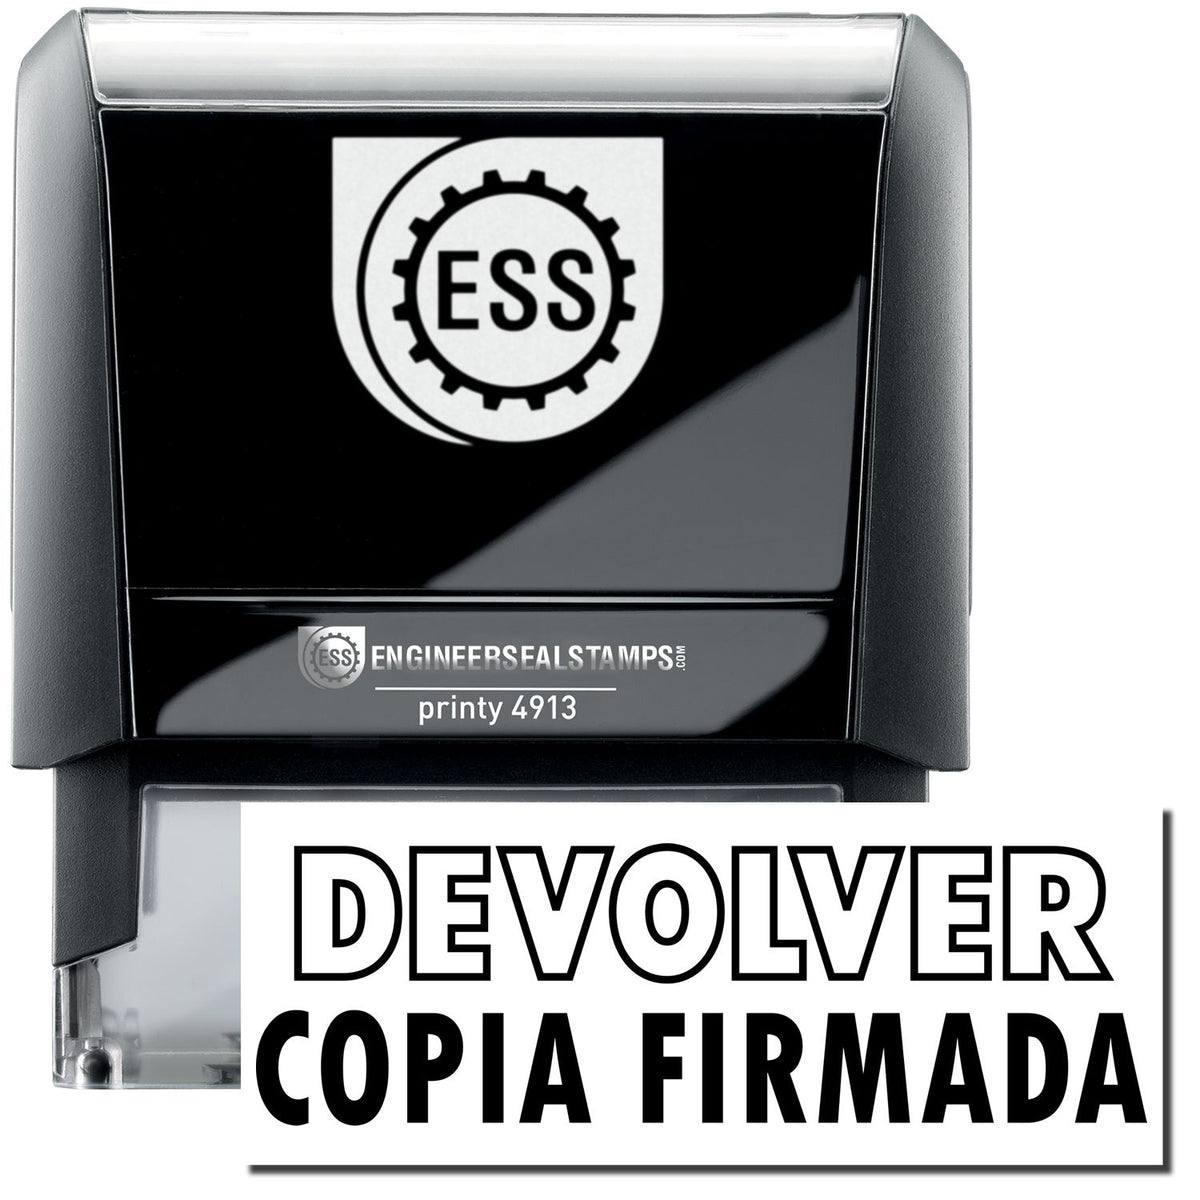 A self-inking stamp with a stamped image showing how the text &quot;DEVOLVER COPIA FIRMADA&quot; in a large font (&quot;DEVOLVER&quot; in outline style) is displayed by it after stamping.